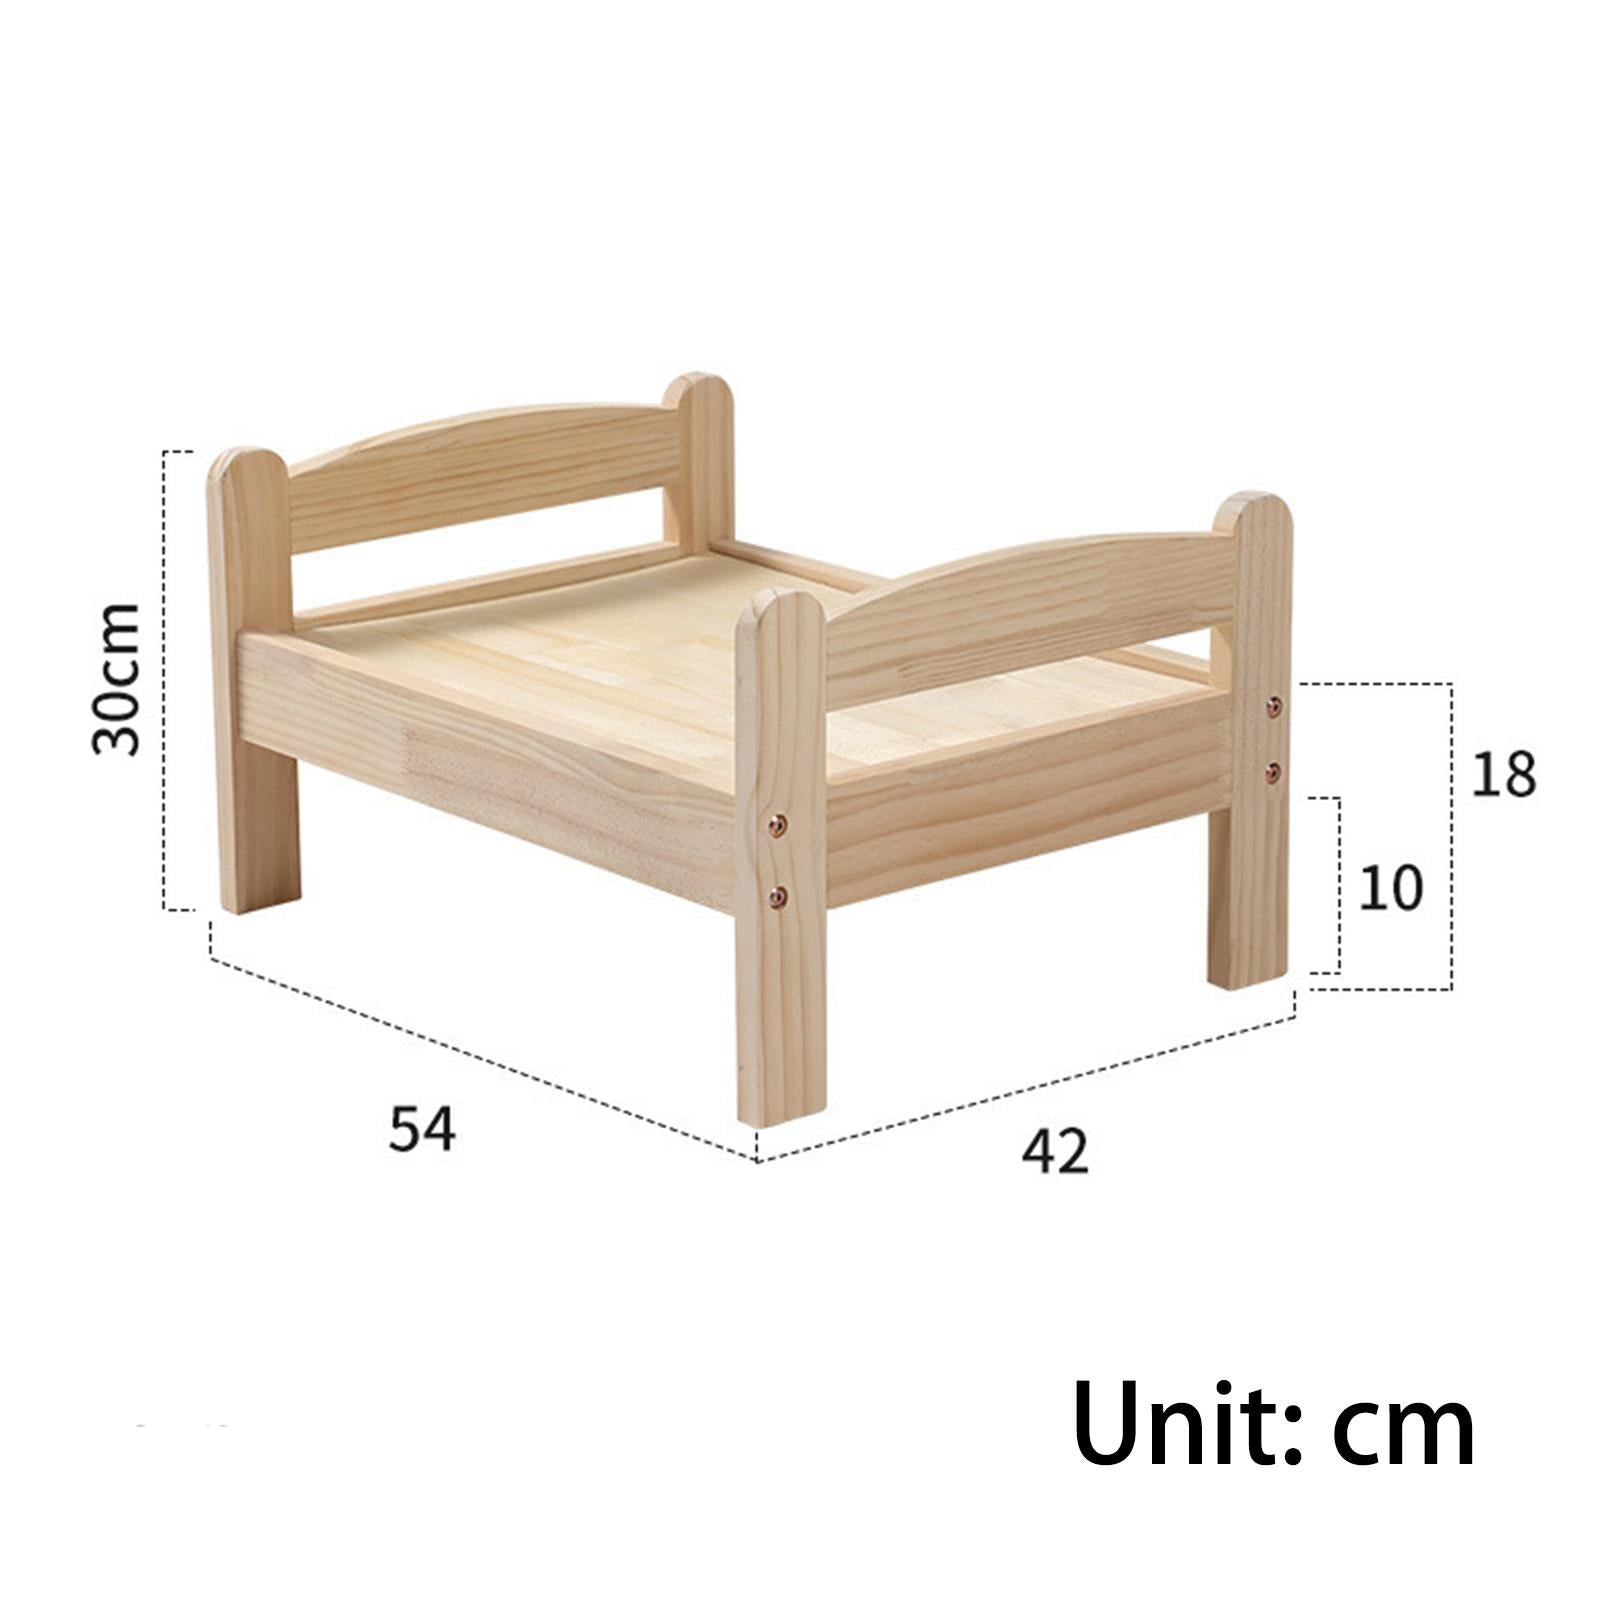 Pet Cat Bed， Small Dog Bed Puppy Kennel Kitten House Wood Winter Elevated Pet Bed Cat Furniture for Indoors and Outdoors Pets Supplies